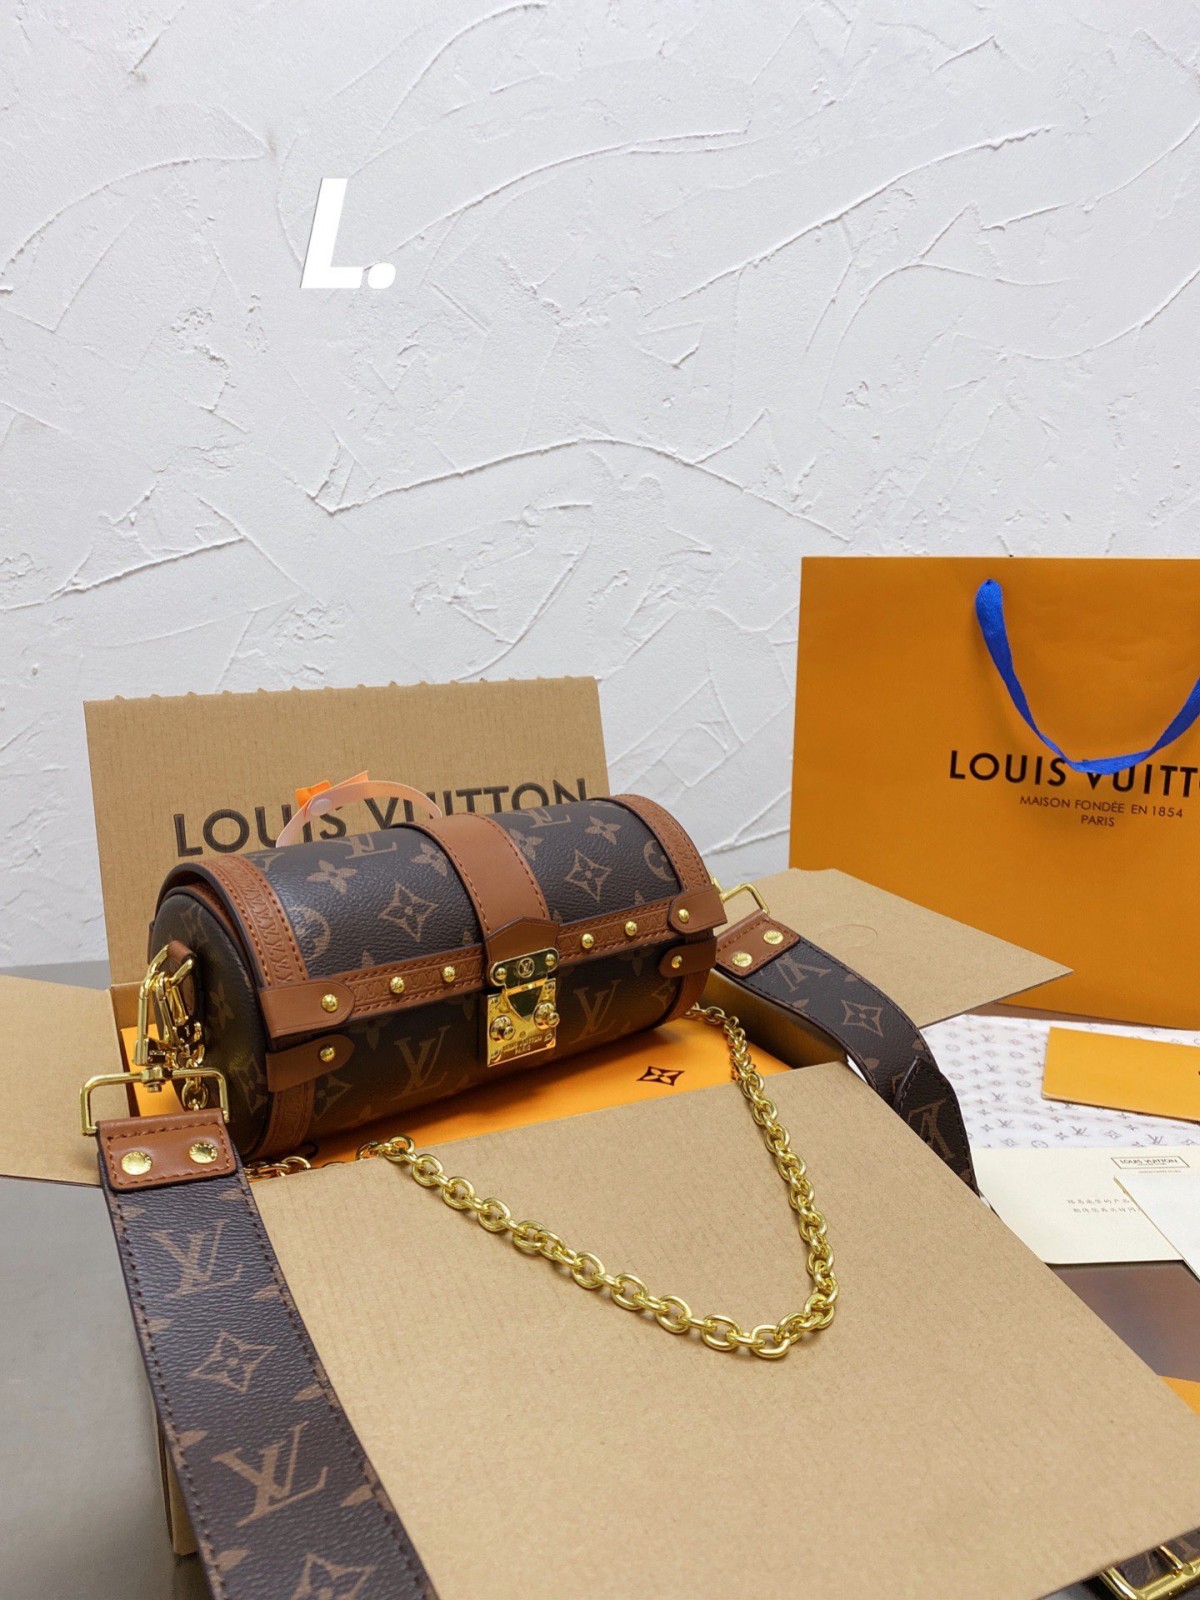 How is the quality of Louis Vuitton PAPILLON TRUNK replica bags? (2022 updated)-Best Quality Fake designer Bag Review, Replica designer bag ru